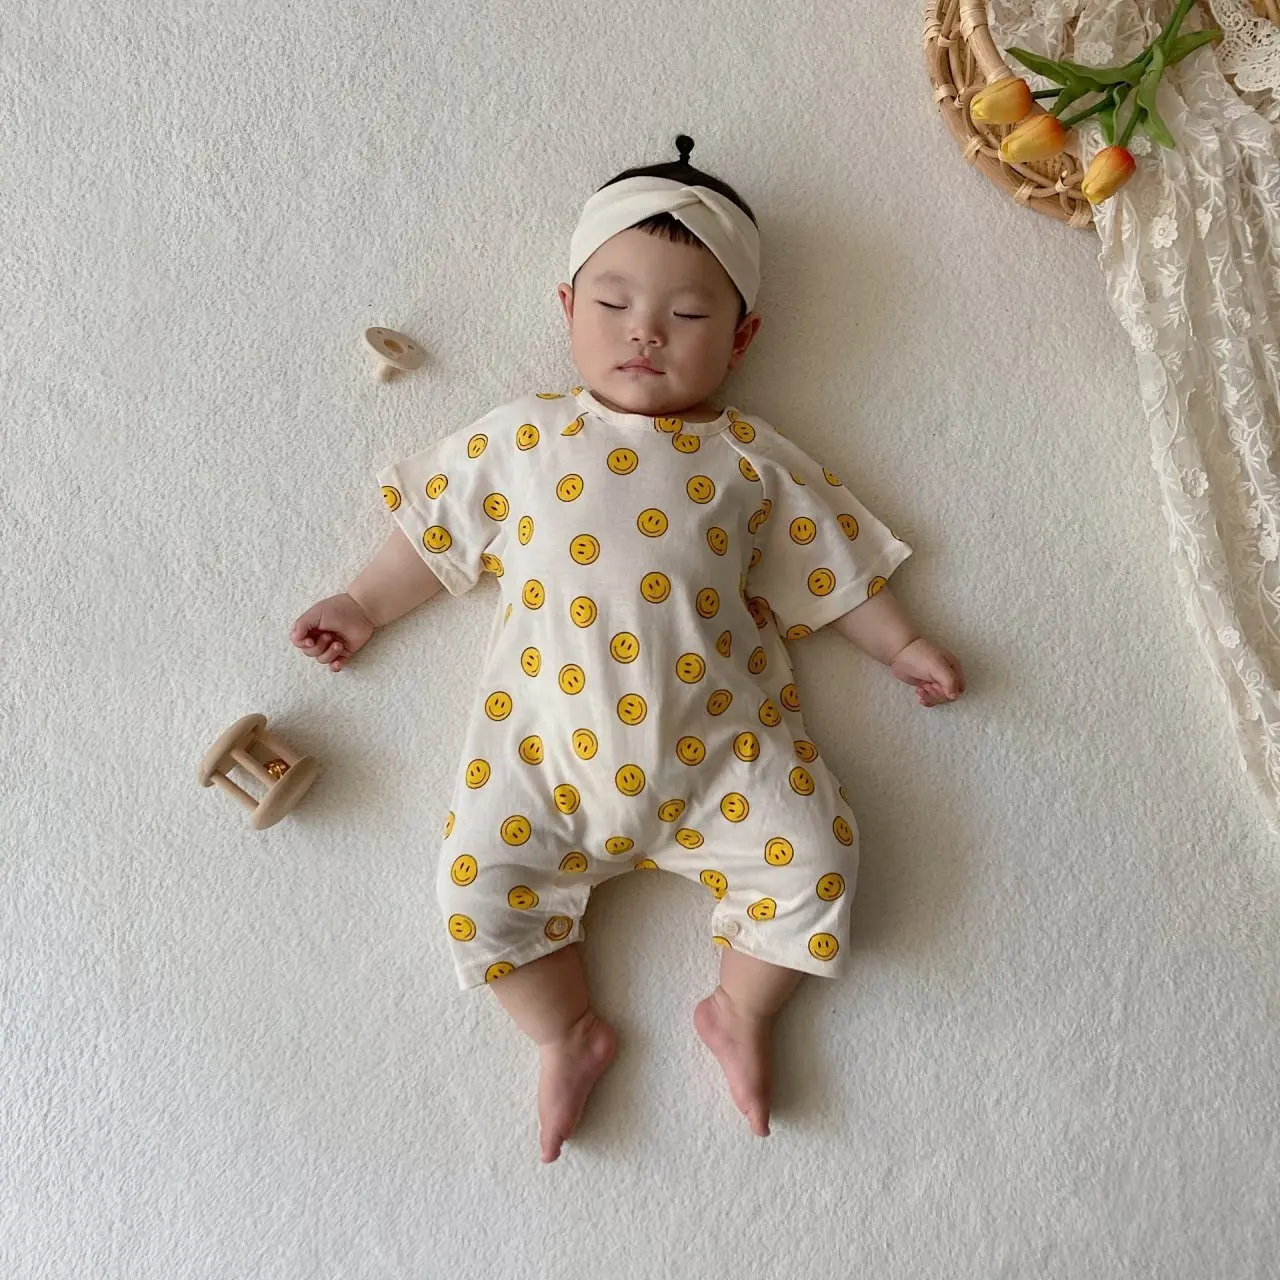 2022 Summer New Baby Short Sleeve Romper Newborn Infant Cute Smiley Print Jumpsuit Toddler Boy Girl Casual Cartoon Clothes 0-24M customised baby bodysuits